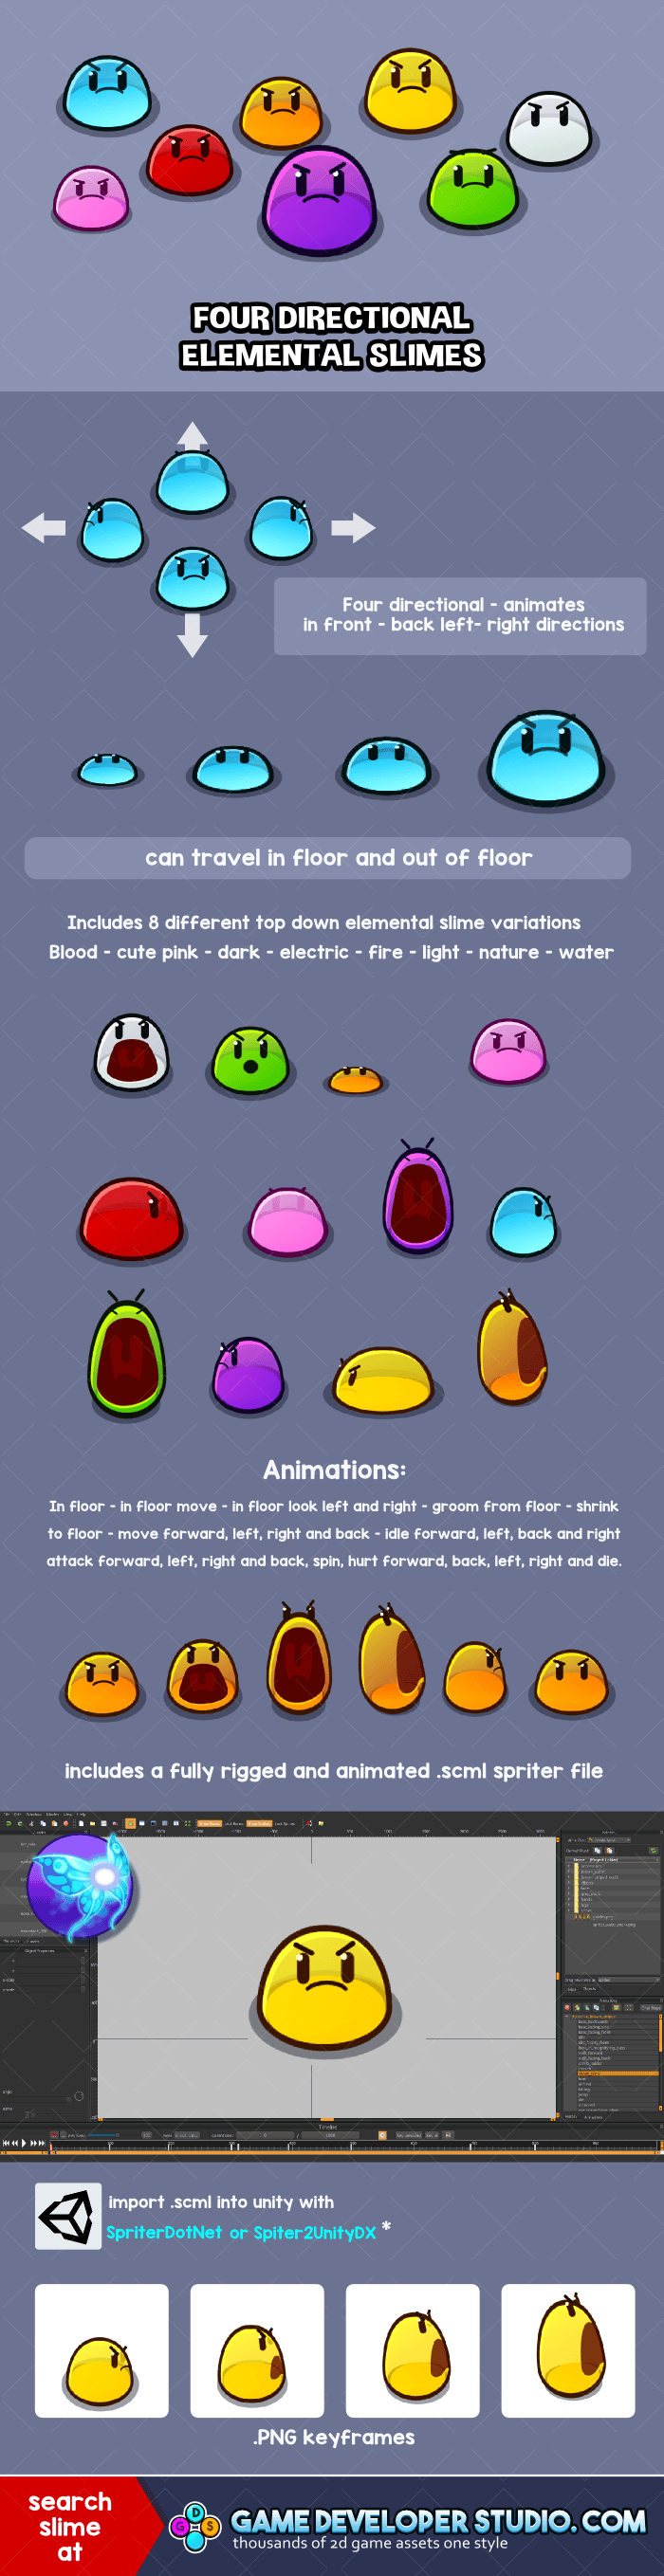 Animated four directional  elemental  slime enemies